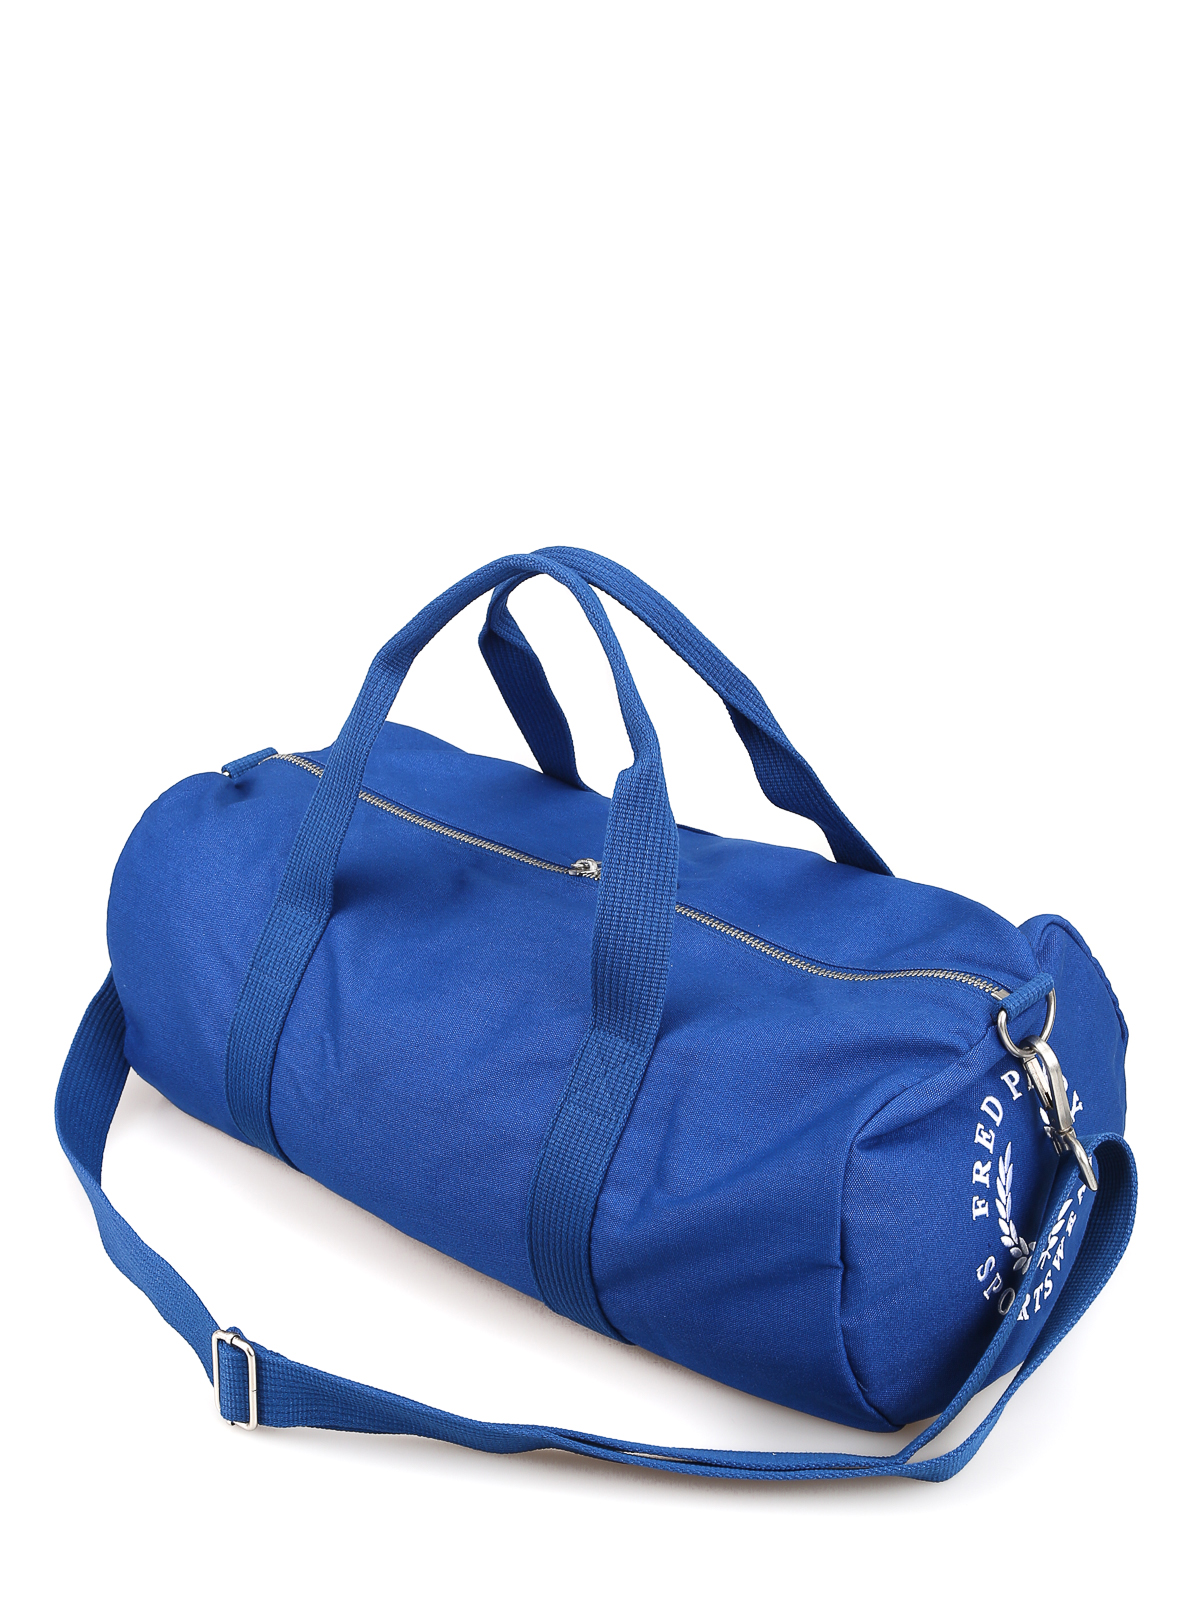 Sport bags Fred Perry - Branded mid blue bag L5277111